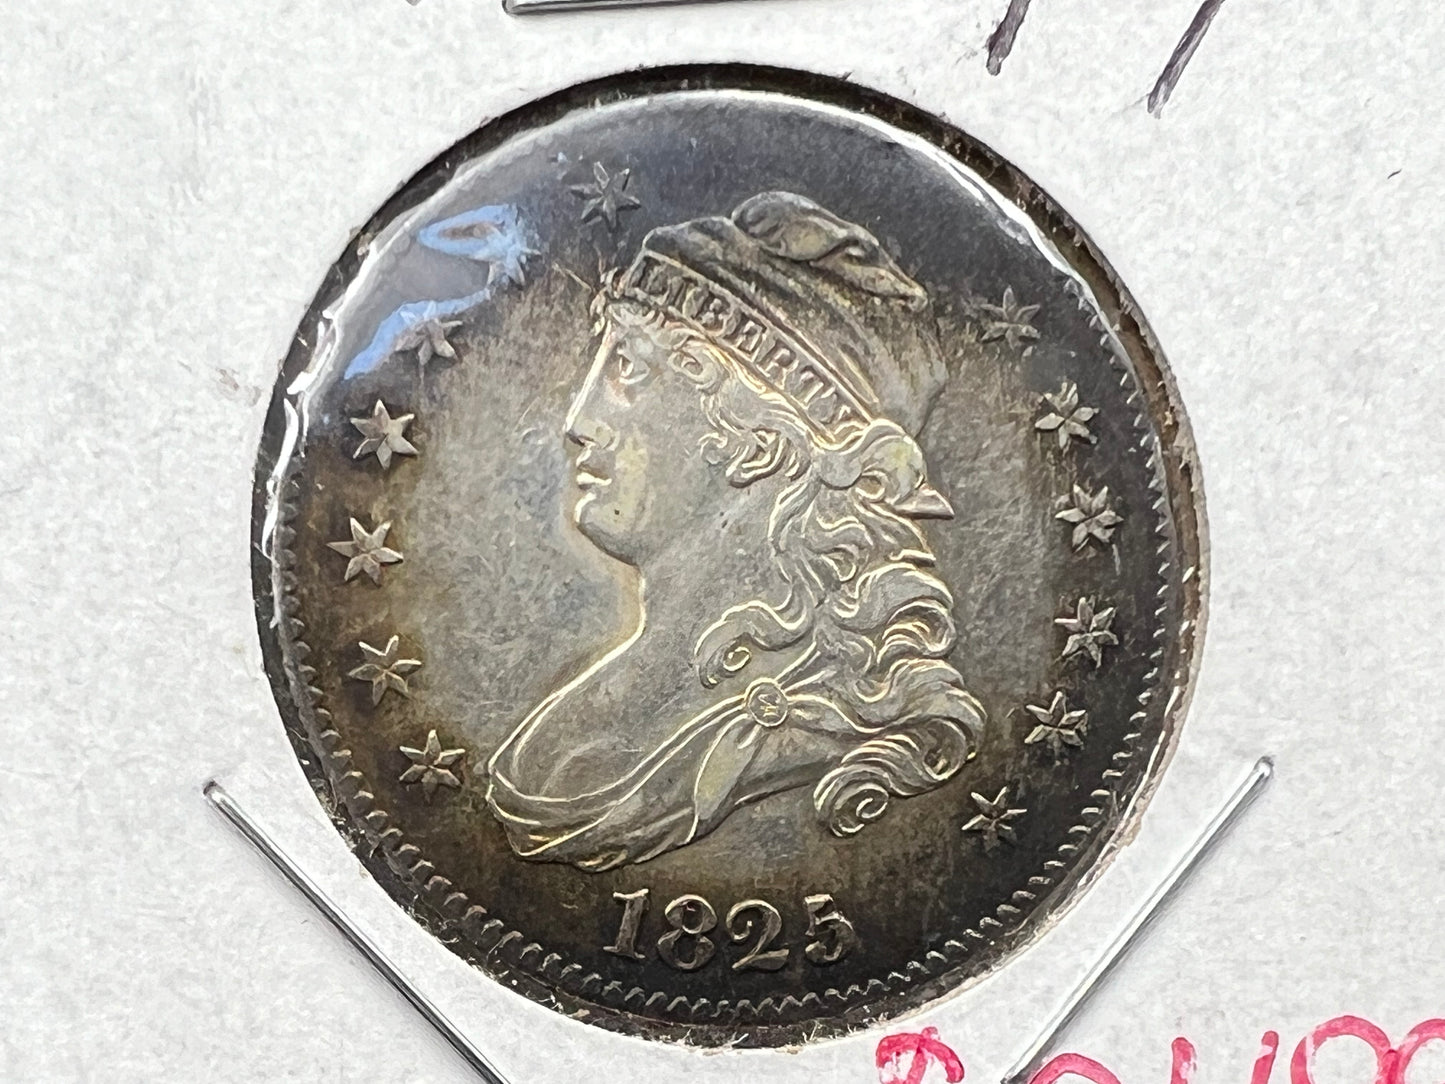 1825/4/2 25c Liberty Capped Bust Quarter coin UNC Details Cleaned